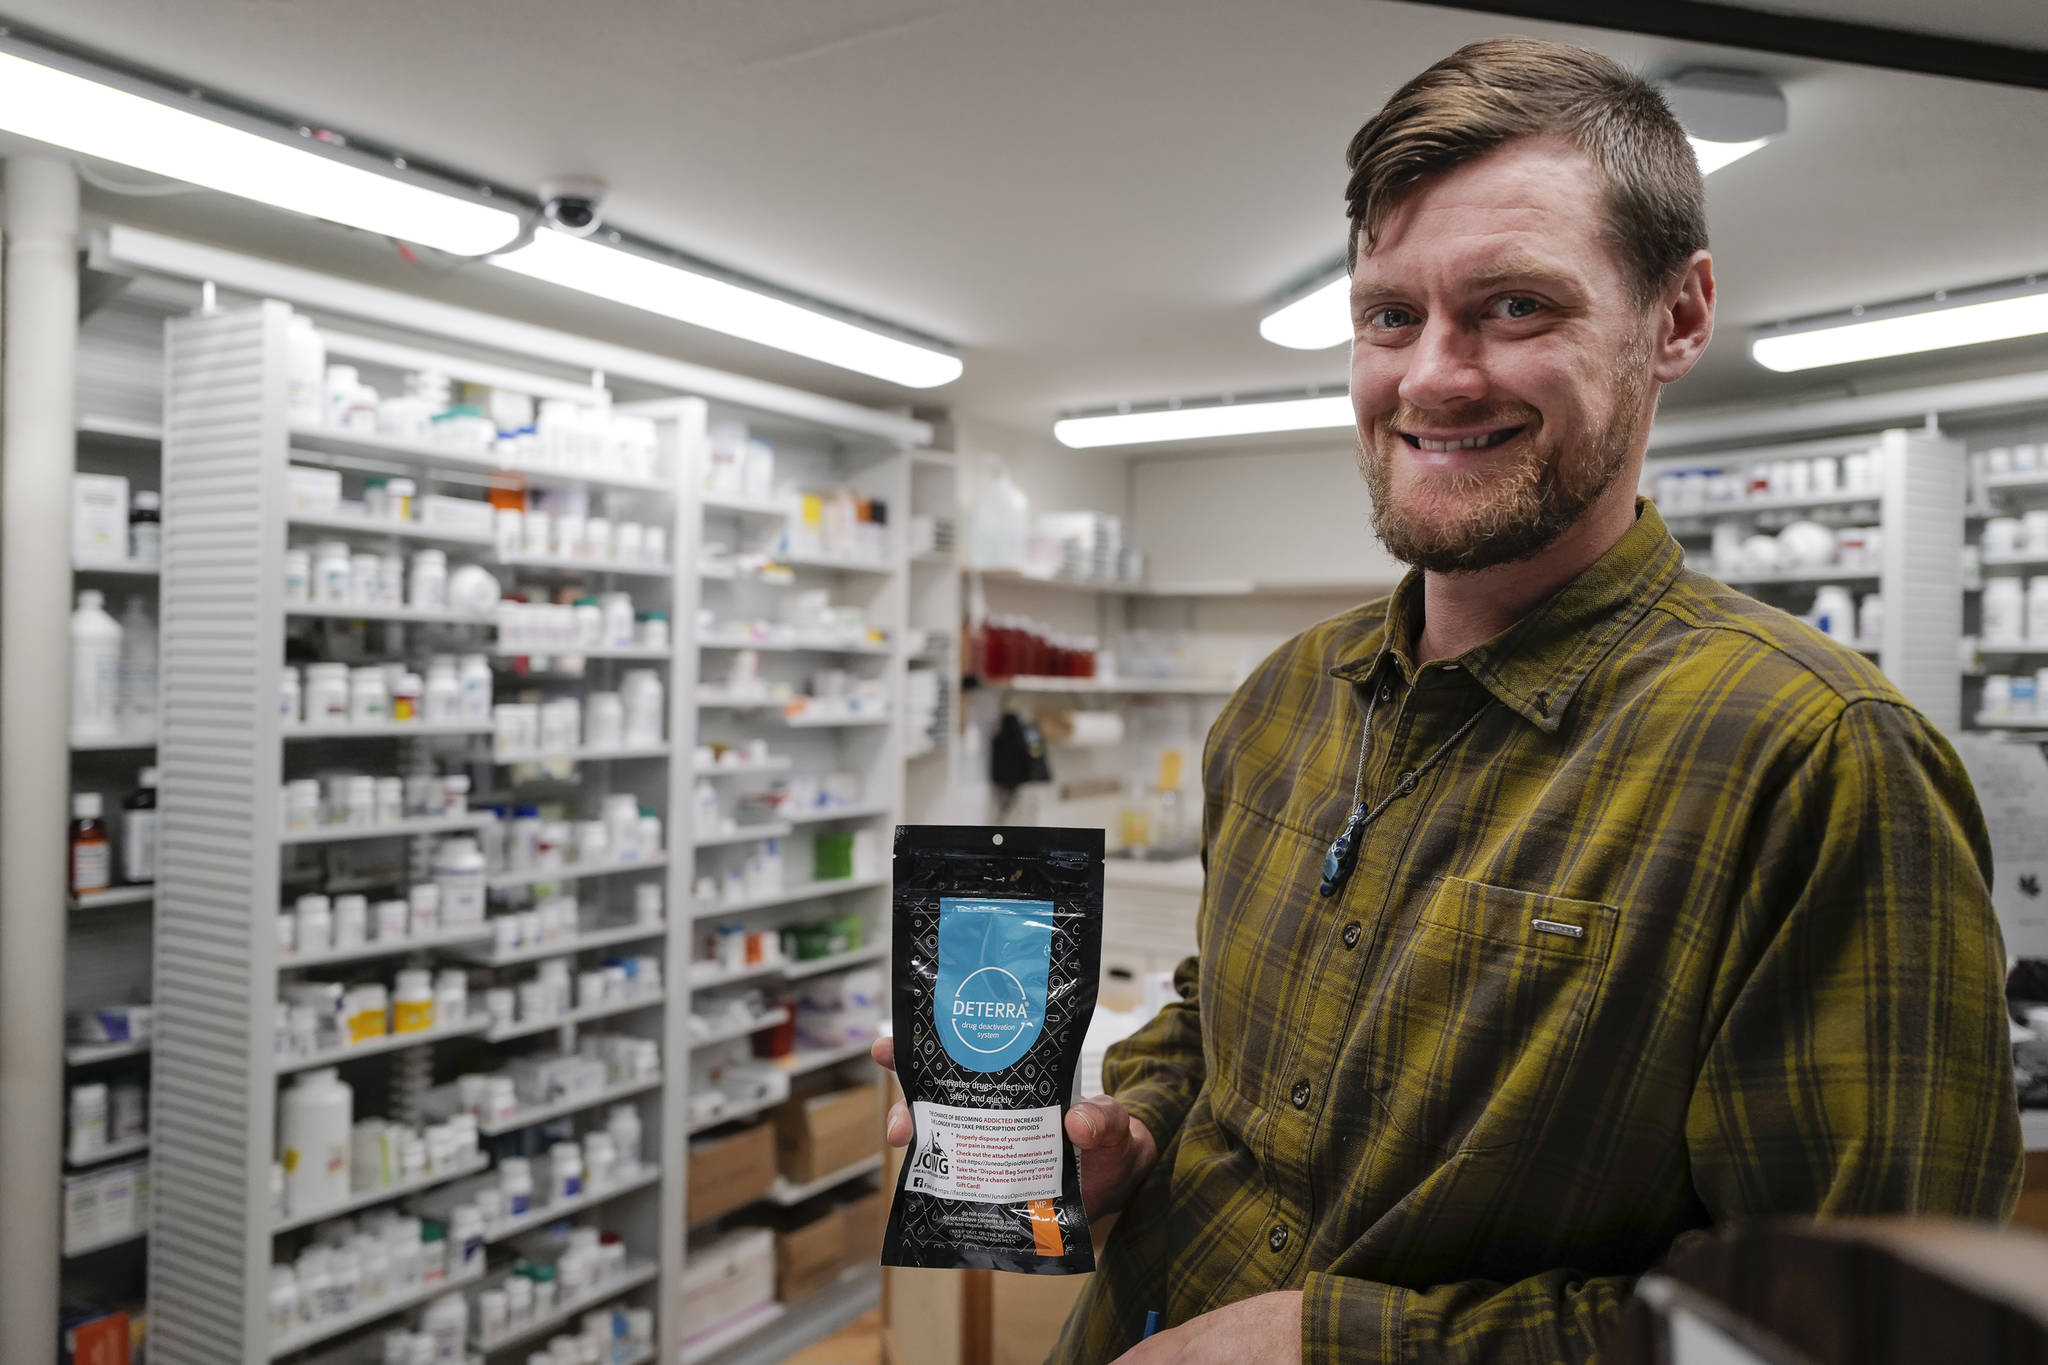 Adam Nelson, a pharmacist at Juneau Drug, displays a drug deactivation bag on Tuesday, Oct. 1, 2019, he gives out with opioid prescriptions. People can use the bag to safely dispose of unused drugs. (Michael Penn | Juneau Empire)